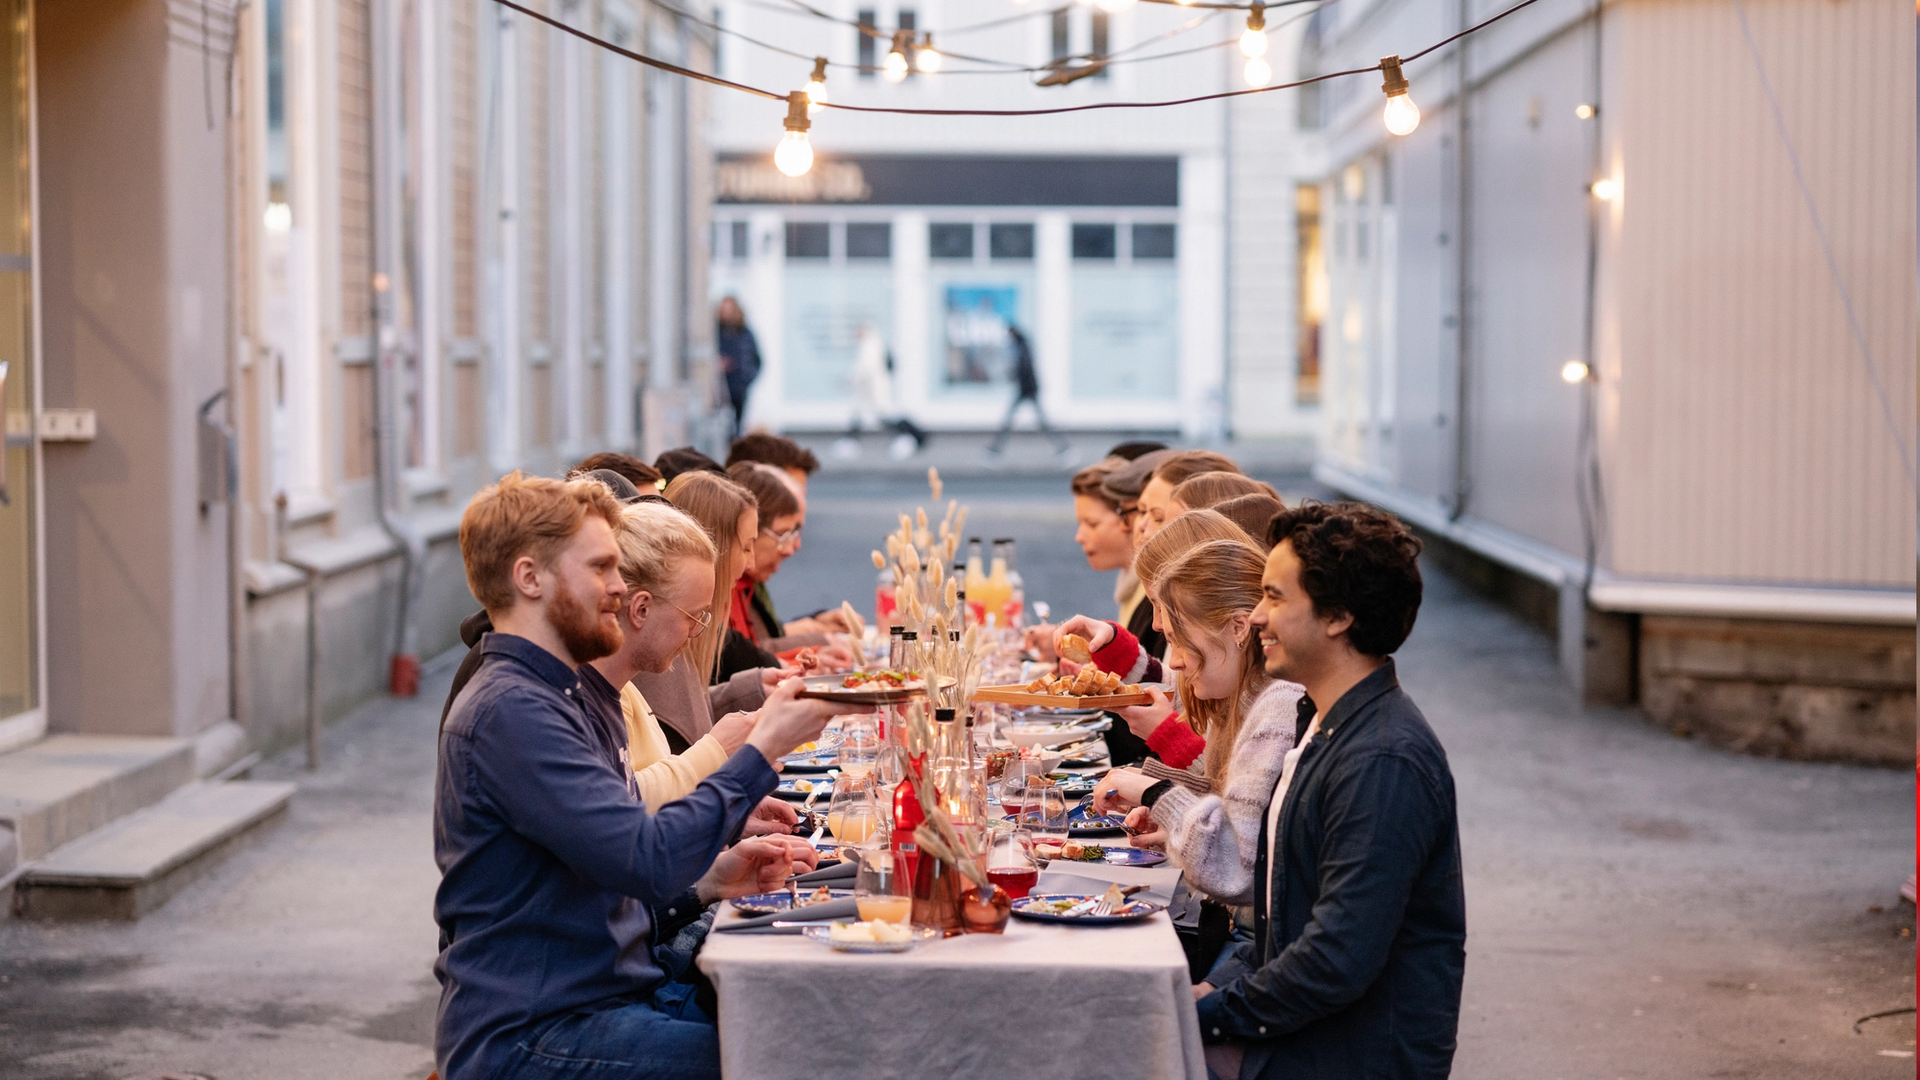 Photo of people dining on the street